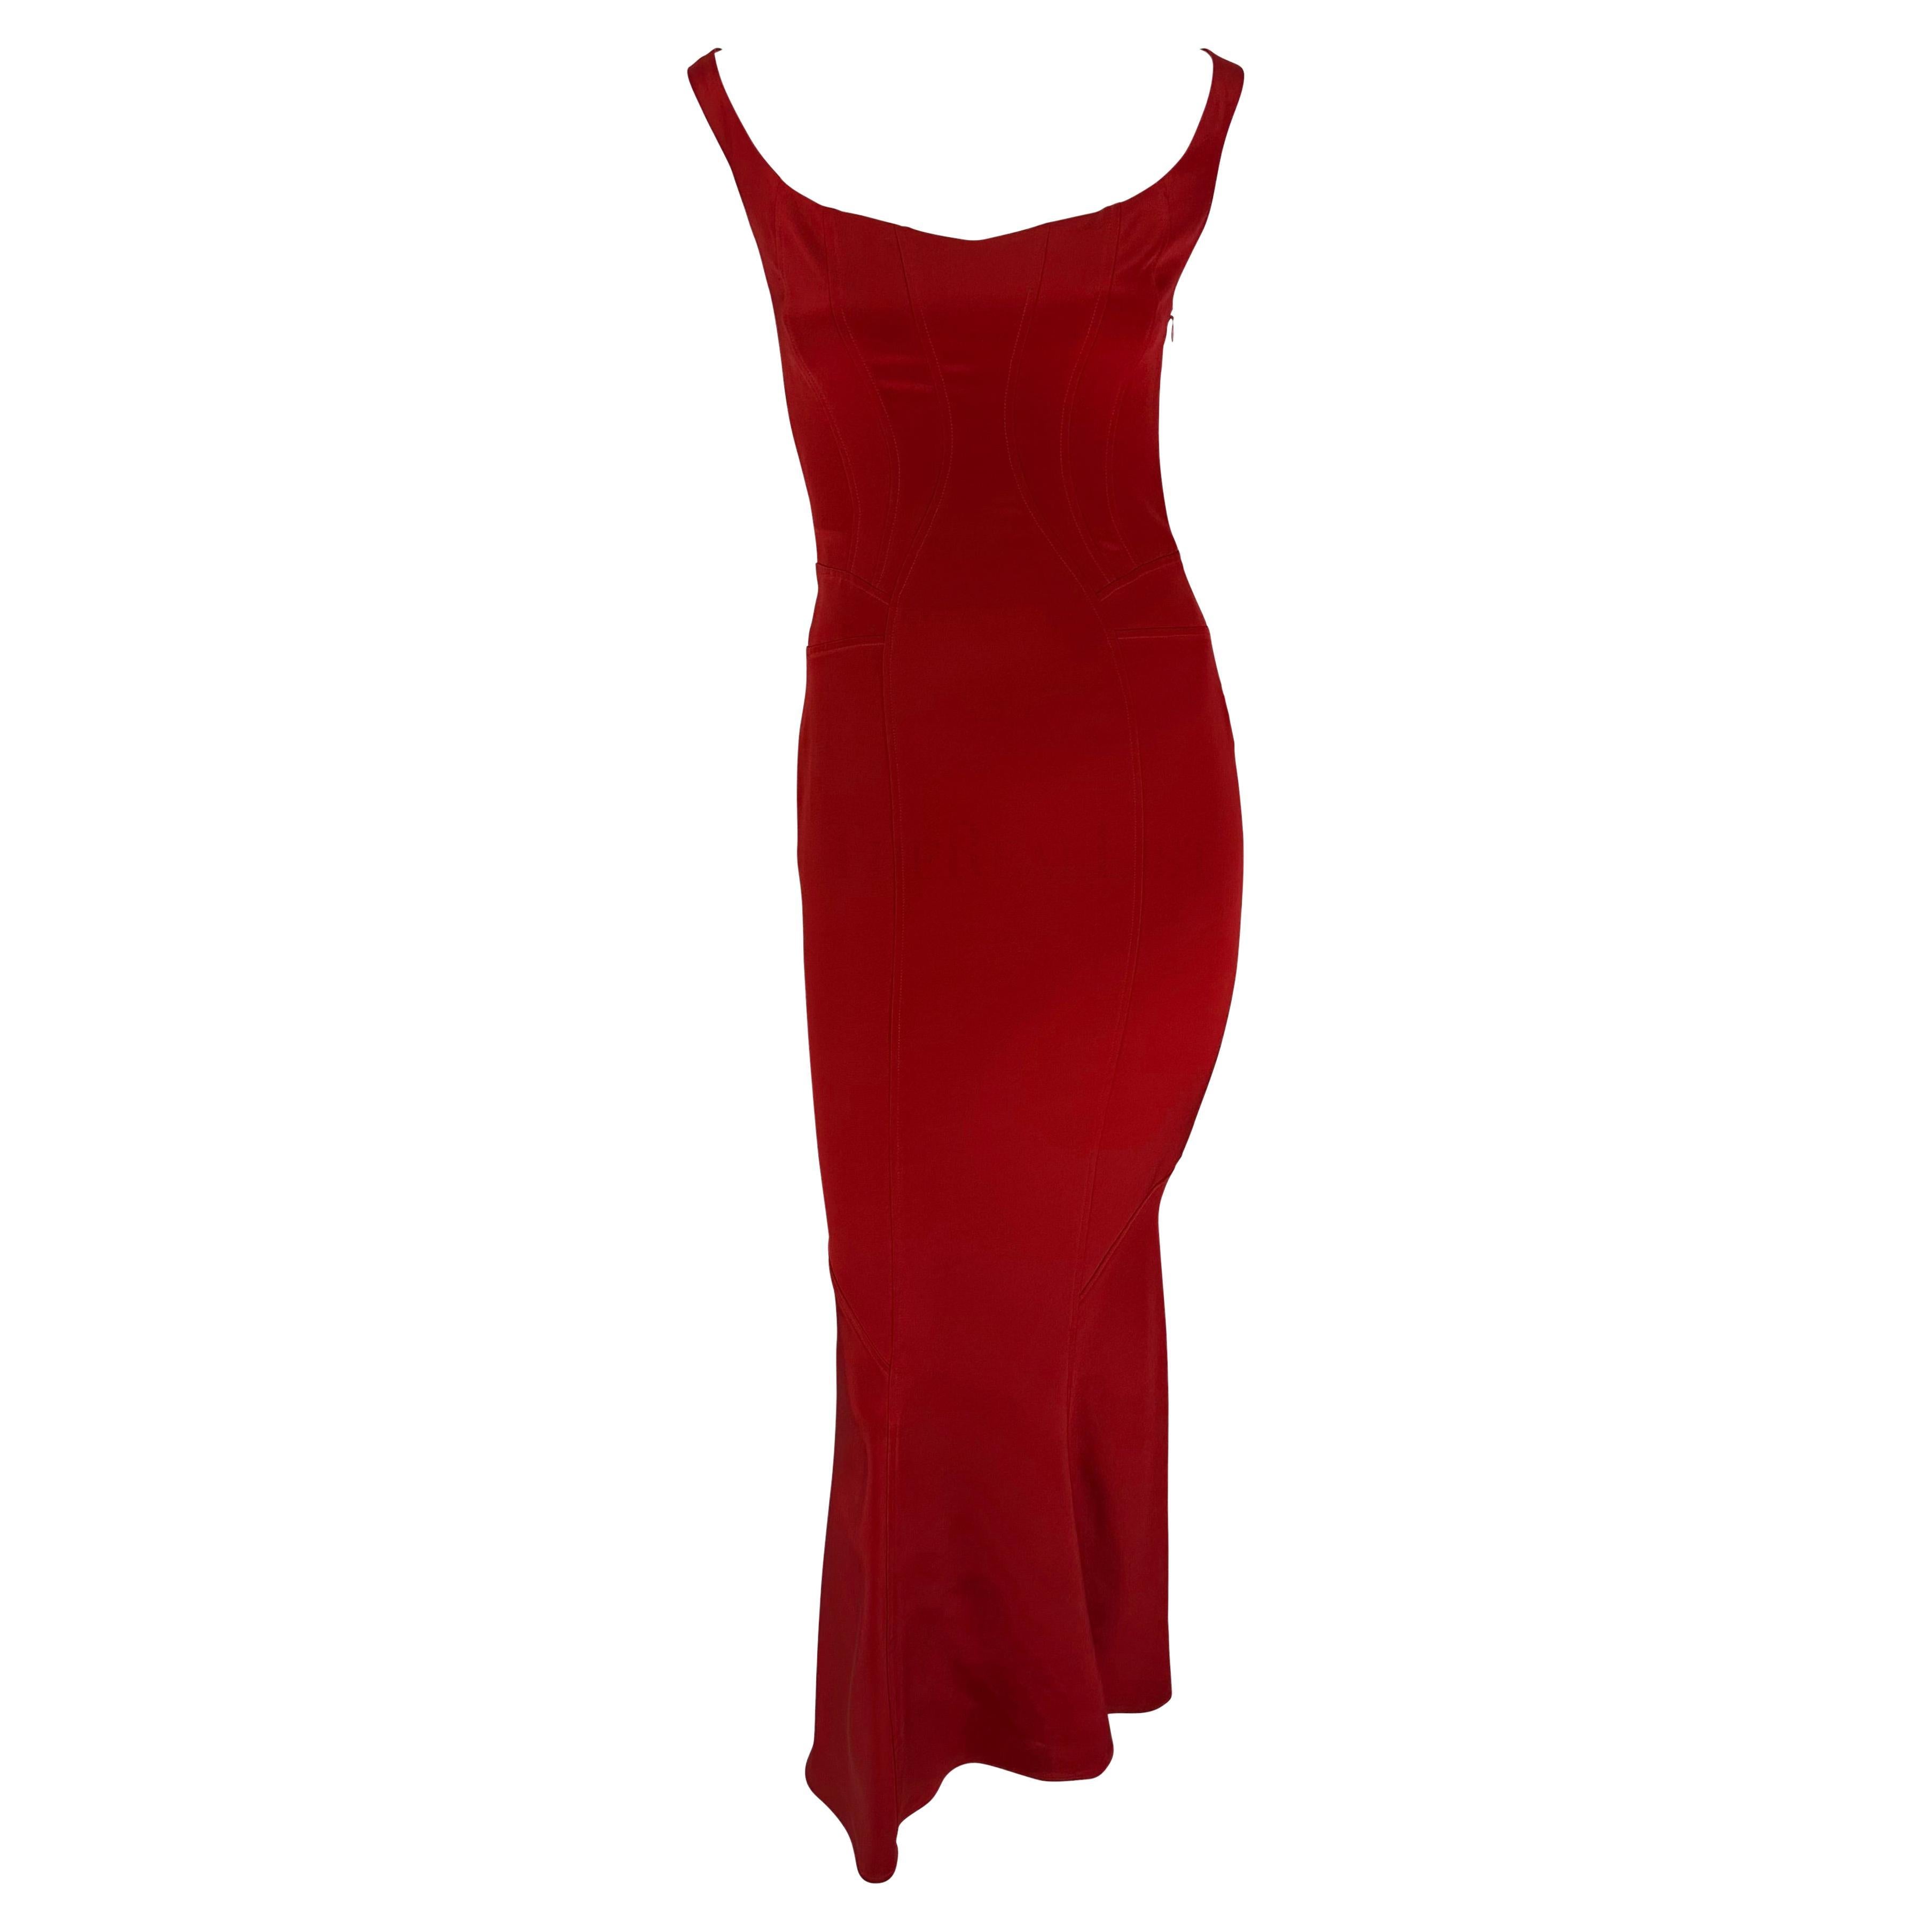 F/W 2004 Yigal Azrouël Runway Silk Satin Red Stretch Bodycon Panel Gown  For Sale